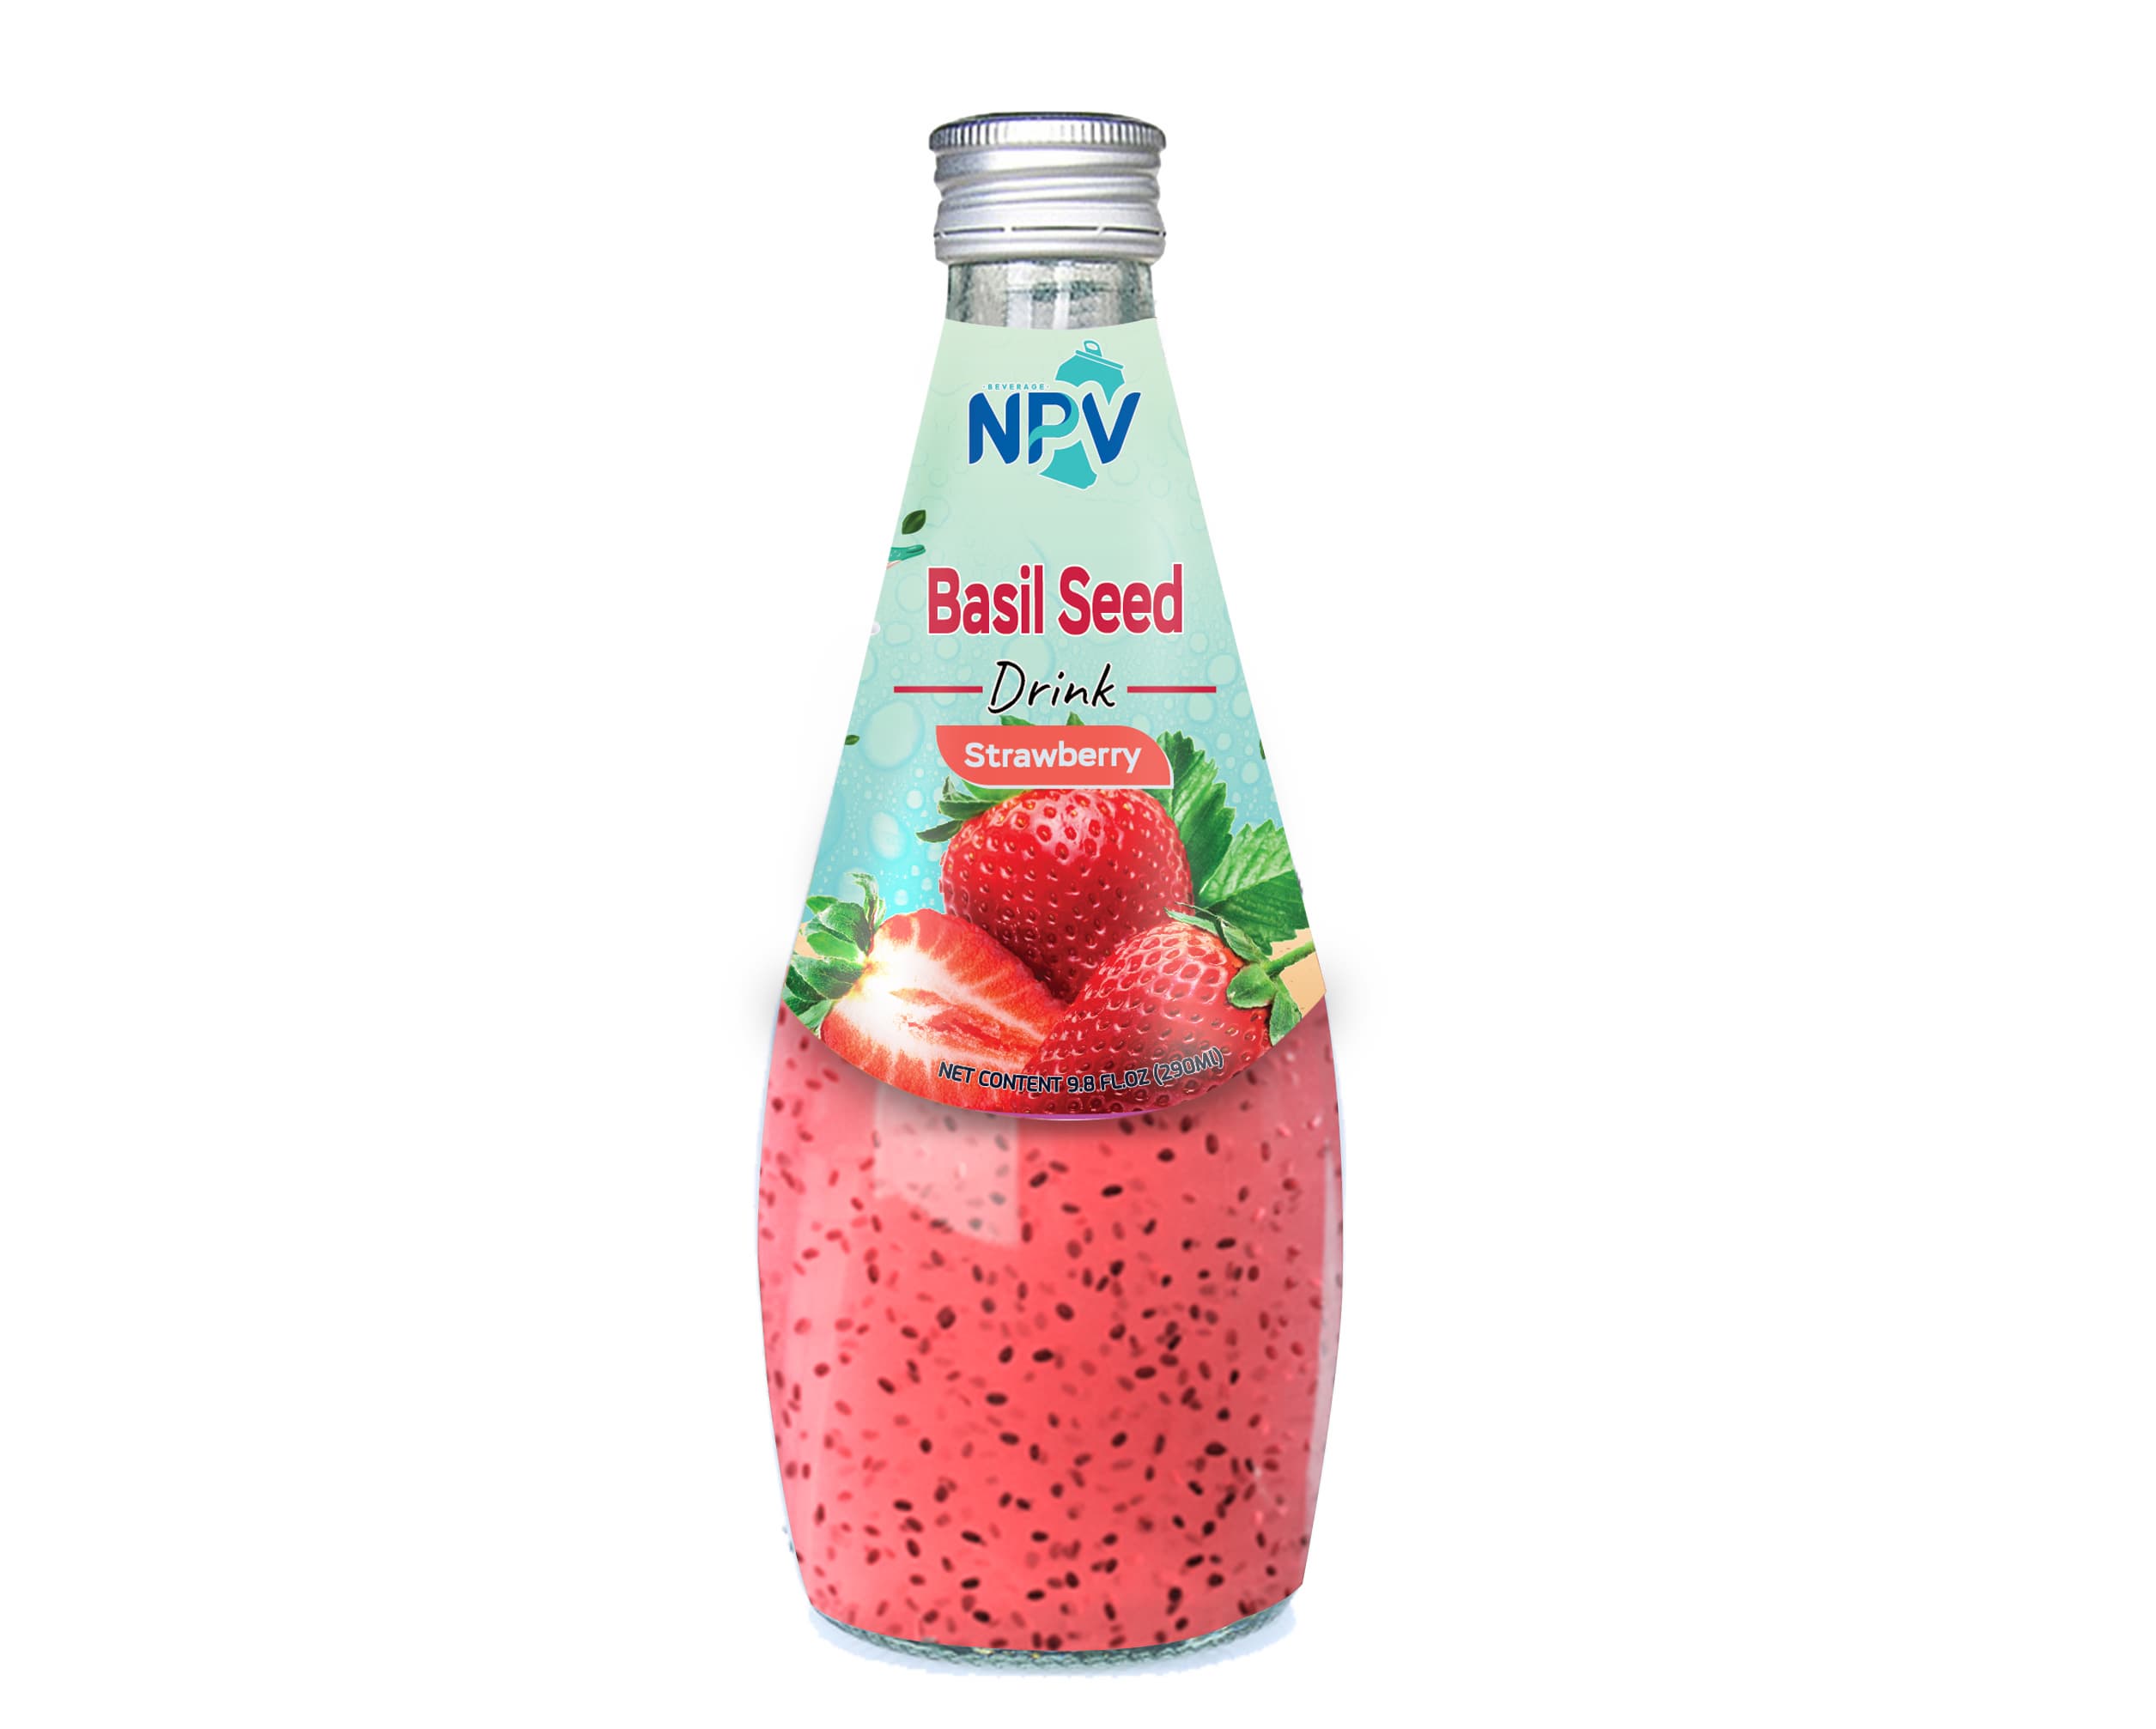 CUSTOM LABEL BEST QUALITY BASIL SEED DRINK WITH LYCHEE FLAVOR 290ML GLASS BOTTLE